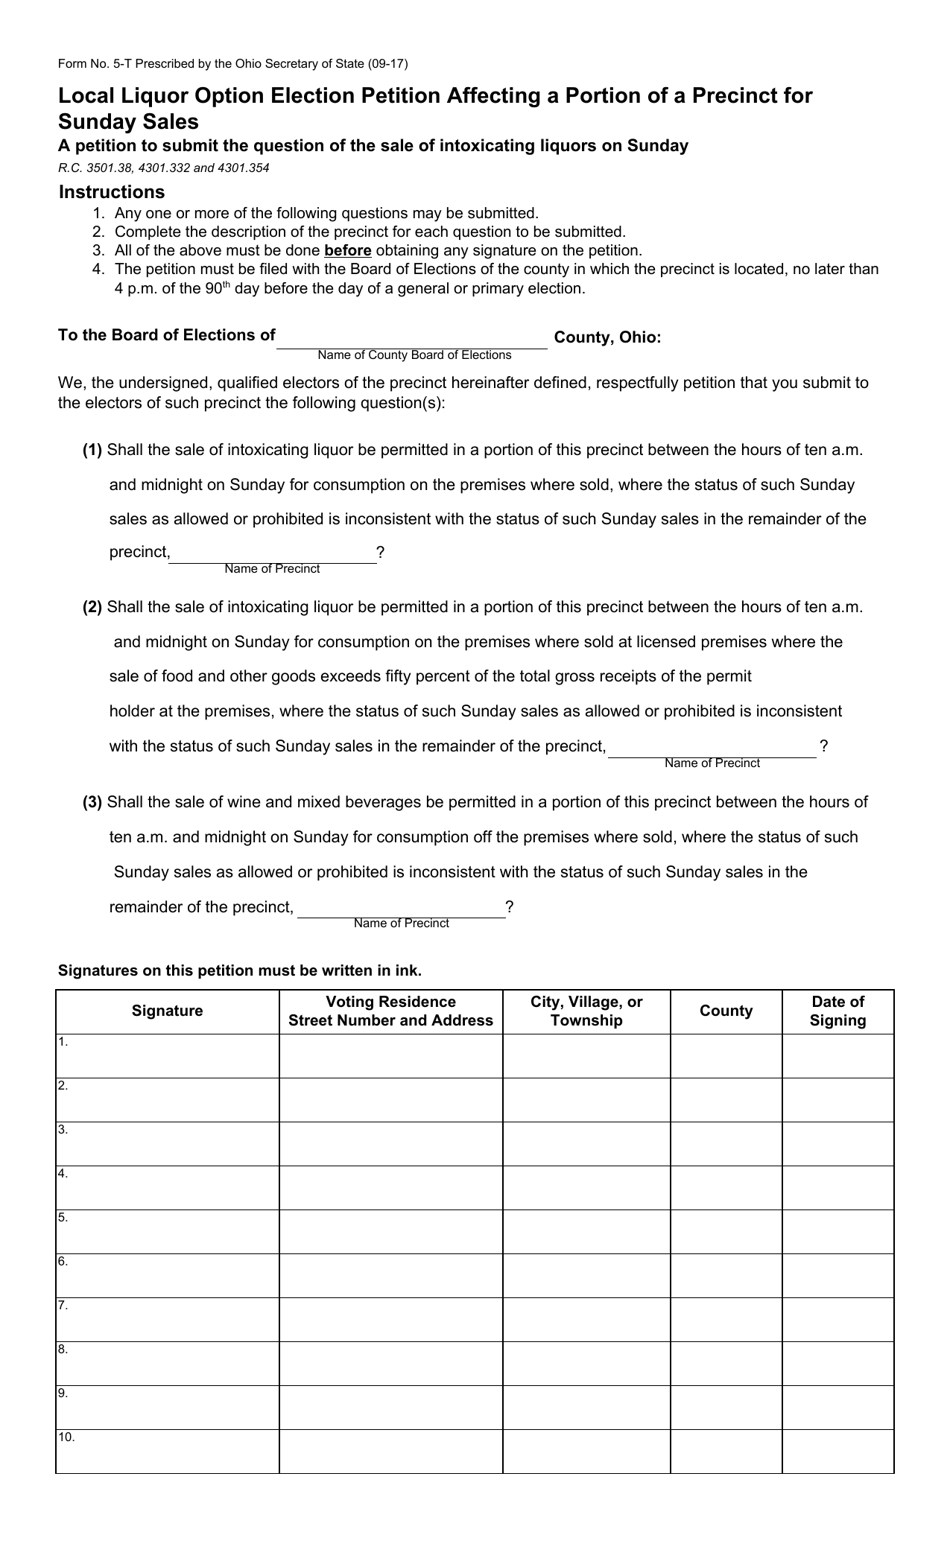 Form 5-T Local Liquor Option Election Petition Affecting a Portion of a Precinct for Sunday Sales - Ohio, Page 1